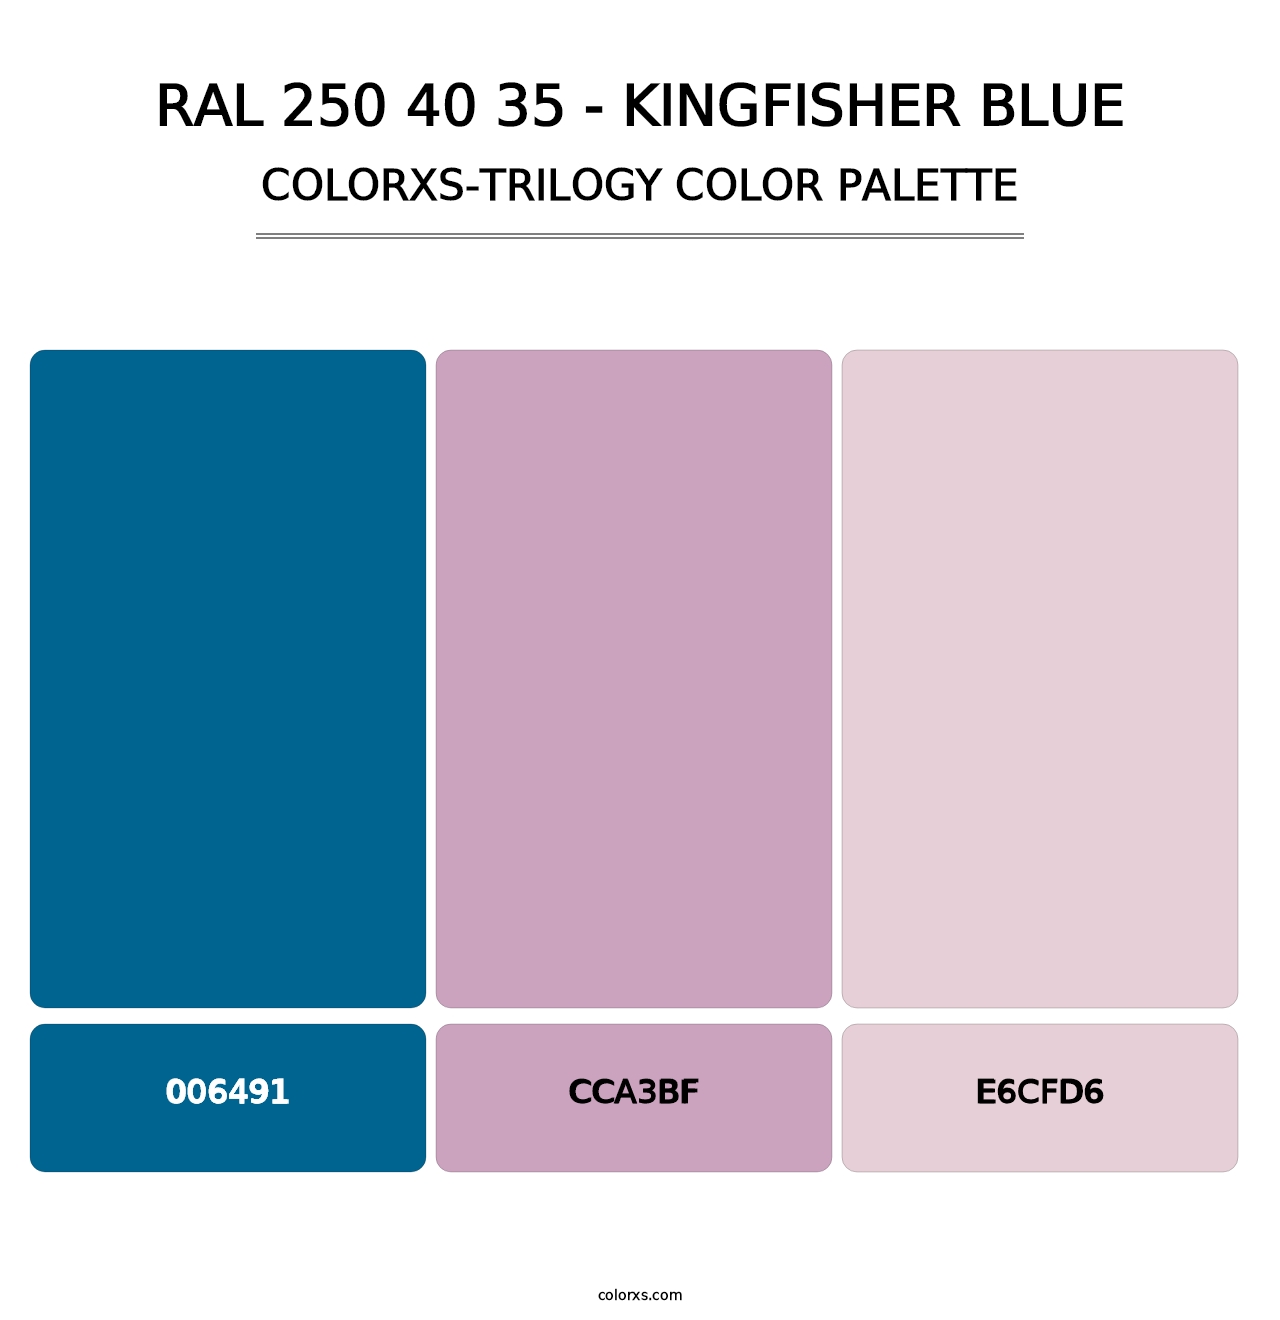 RAL 250 40 35 - Kingfisher Blue - Colorxs Trilogy Palette